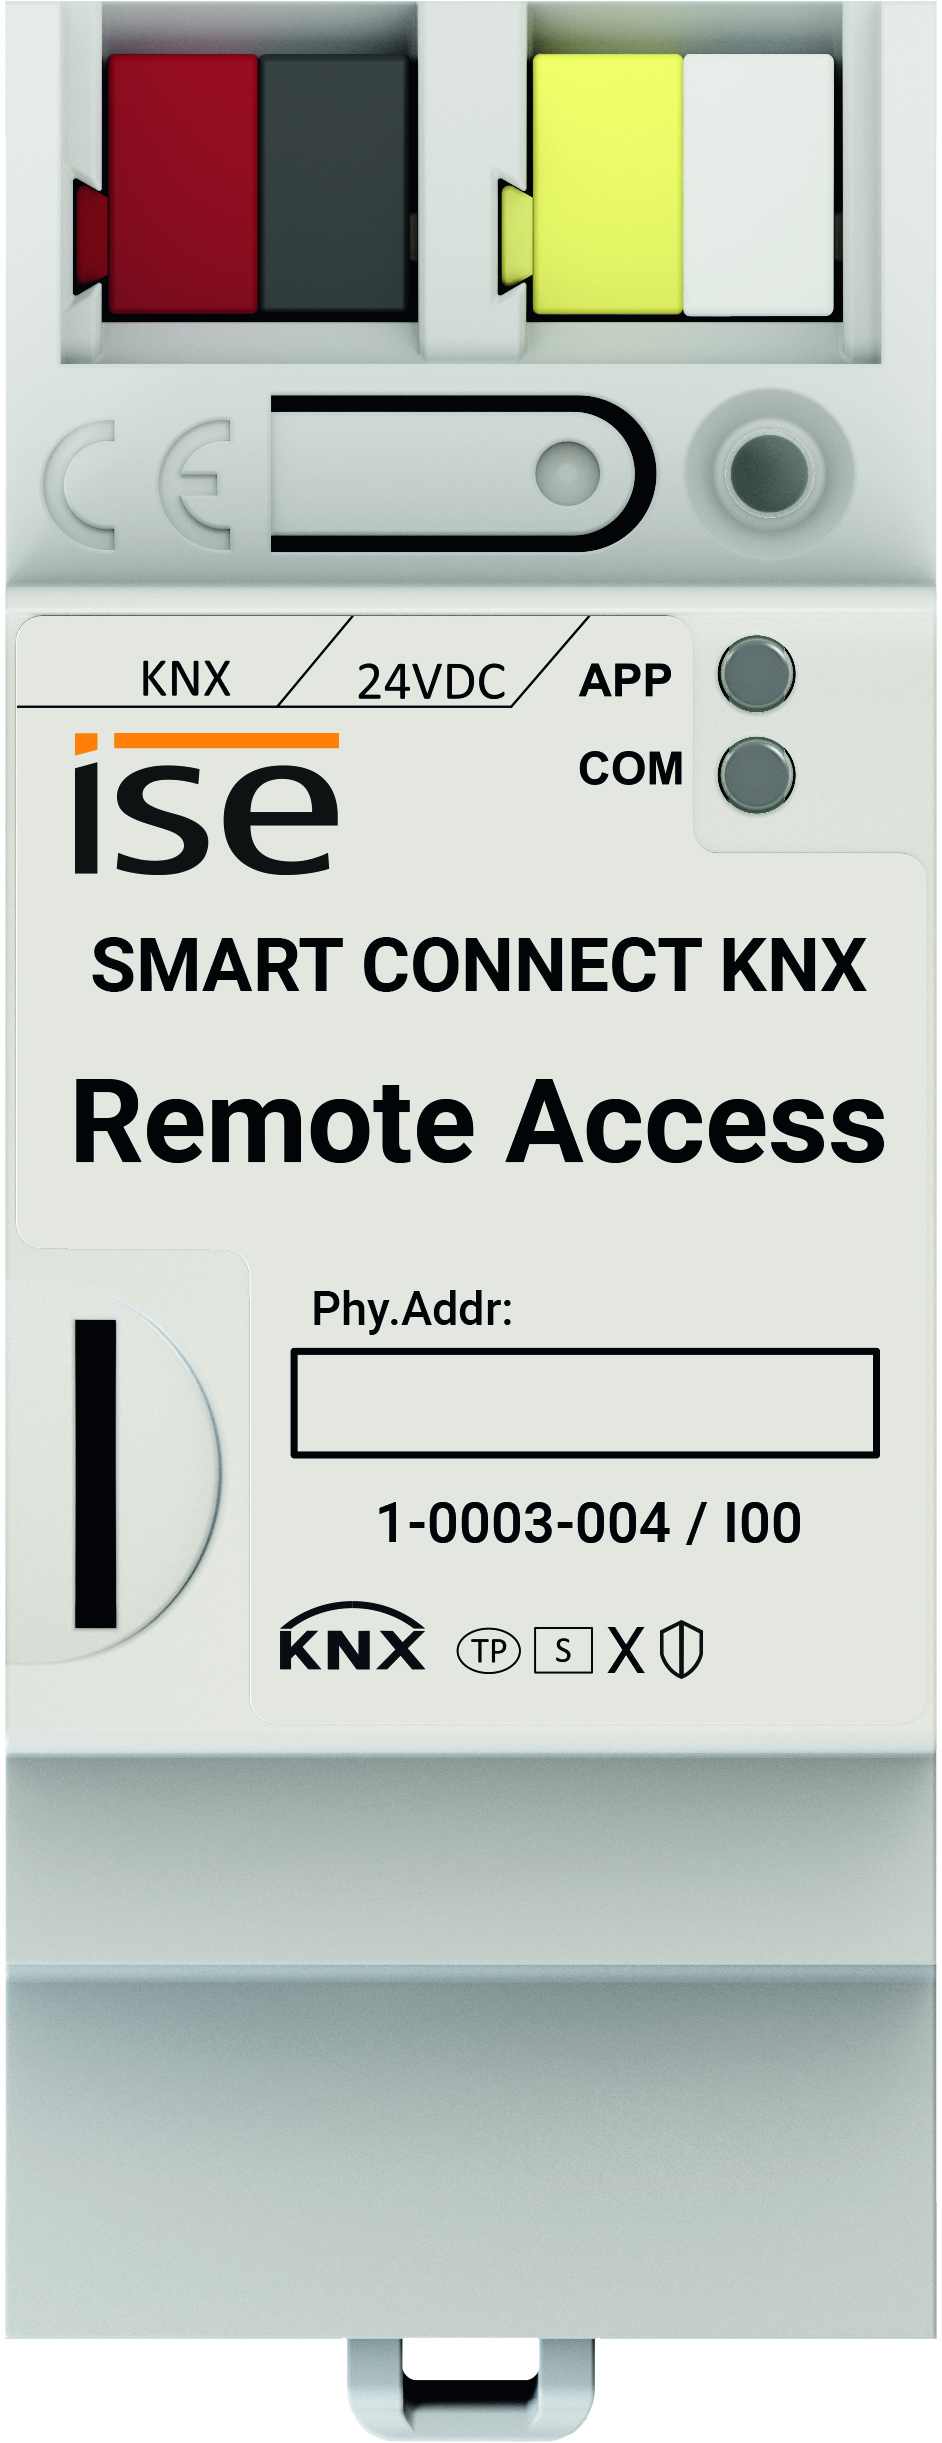 KNX SMART CONNECT Remote Access